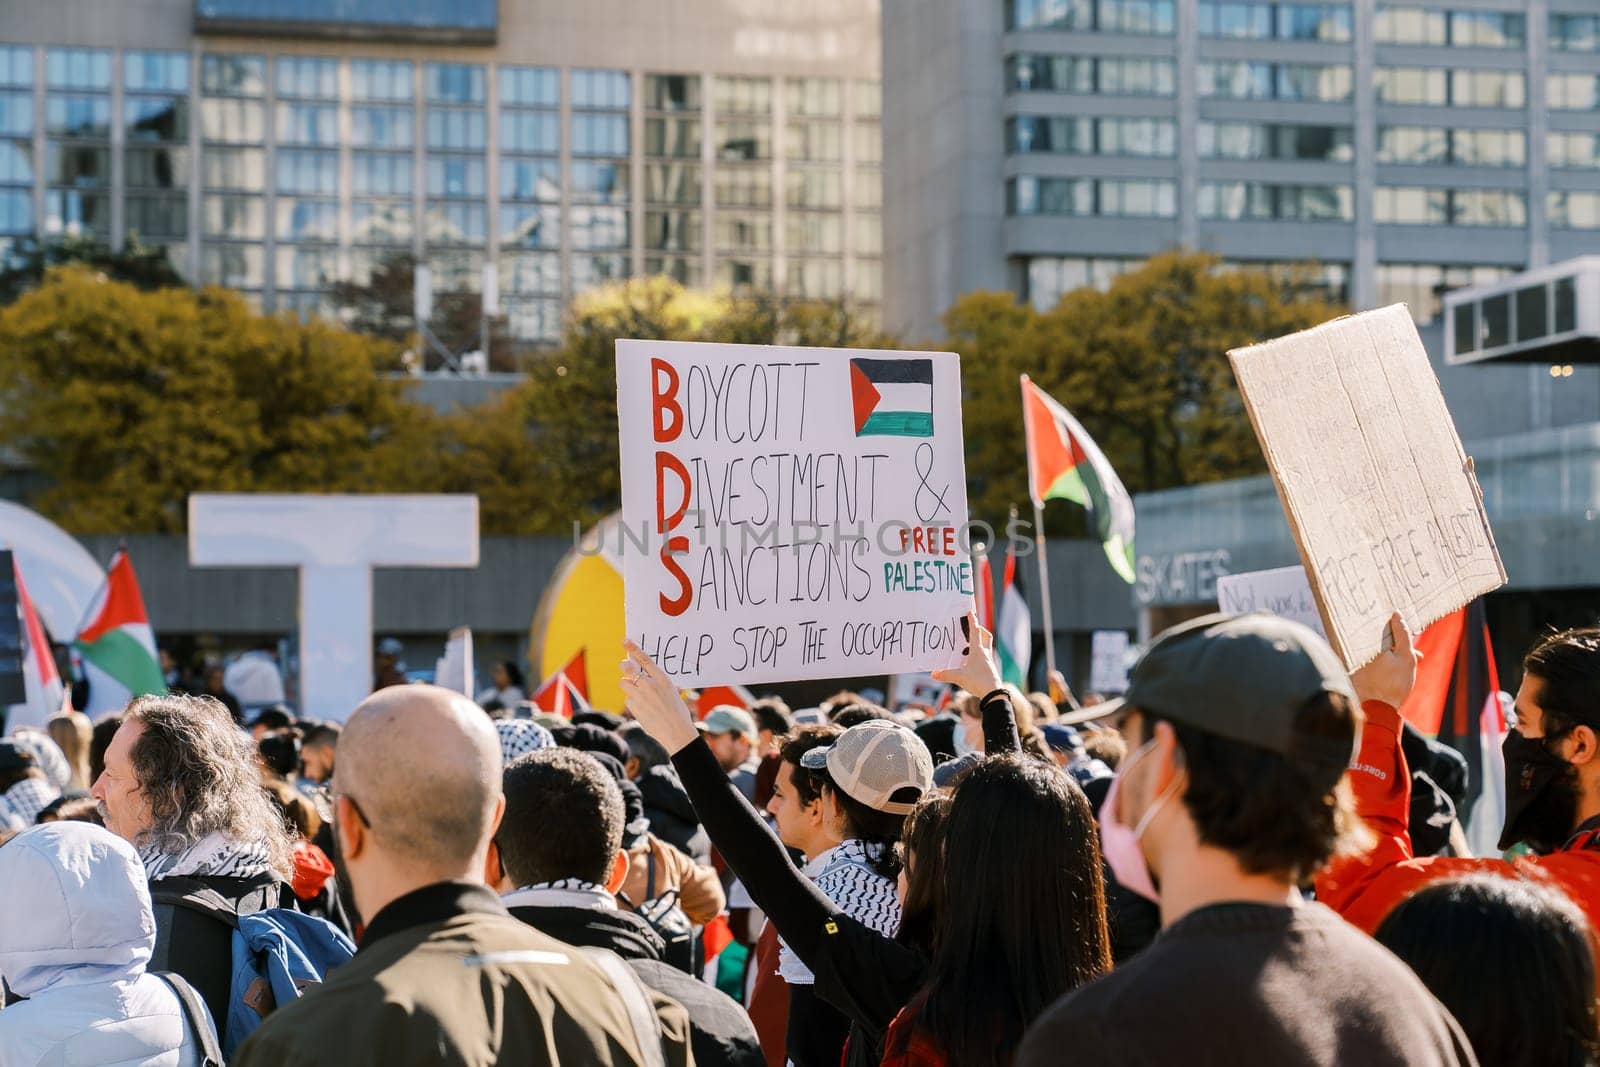 Toronto, Canada - 28 October 2023: Protesters march in the city, holding signs advocating for Boycott, Divestment, and Sanctions against the occupation and supporting Palestine. High quality photo